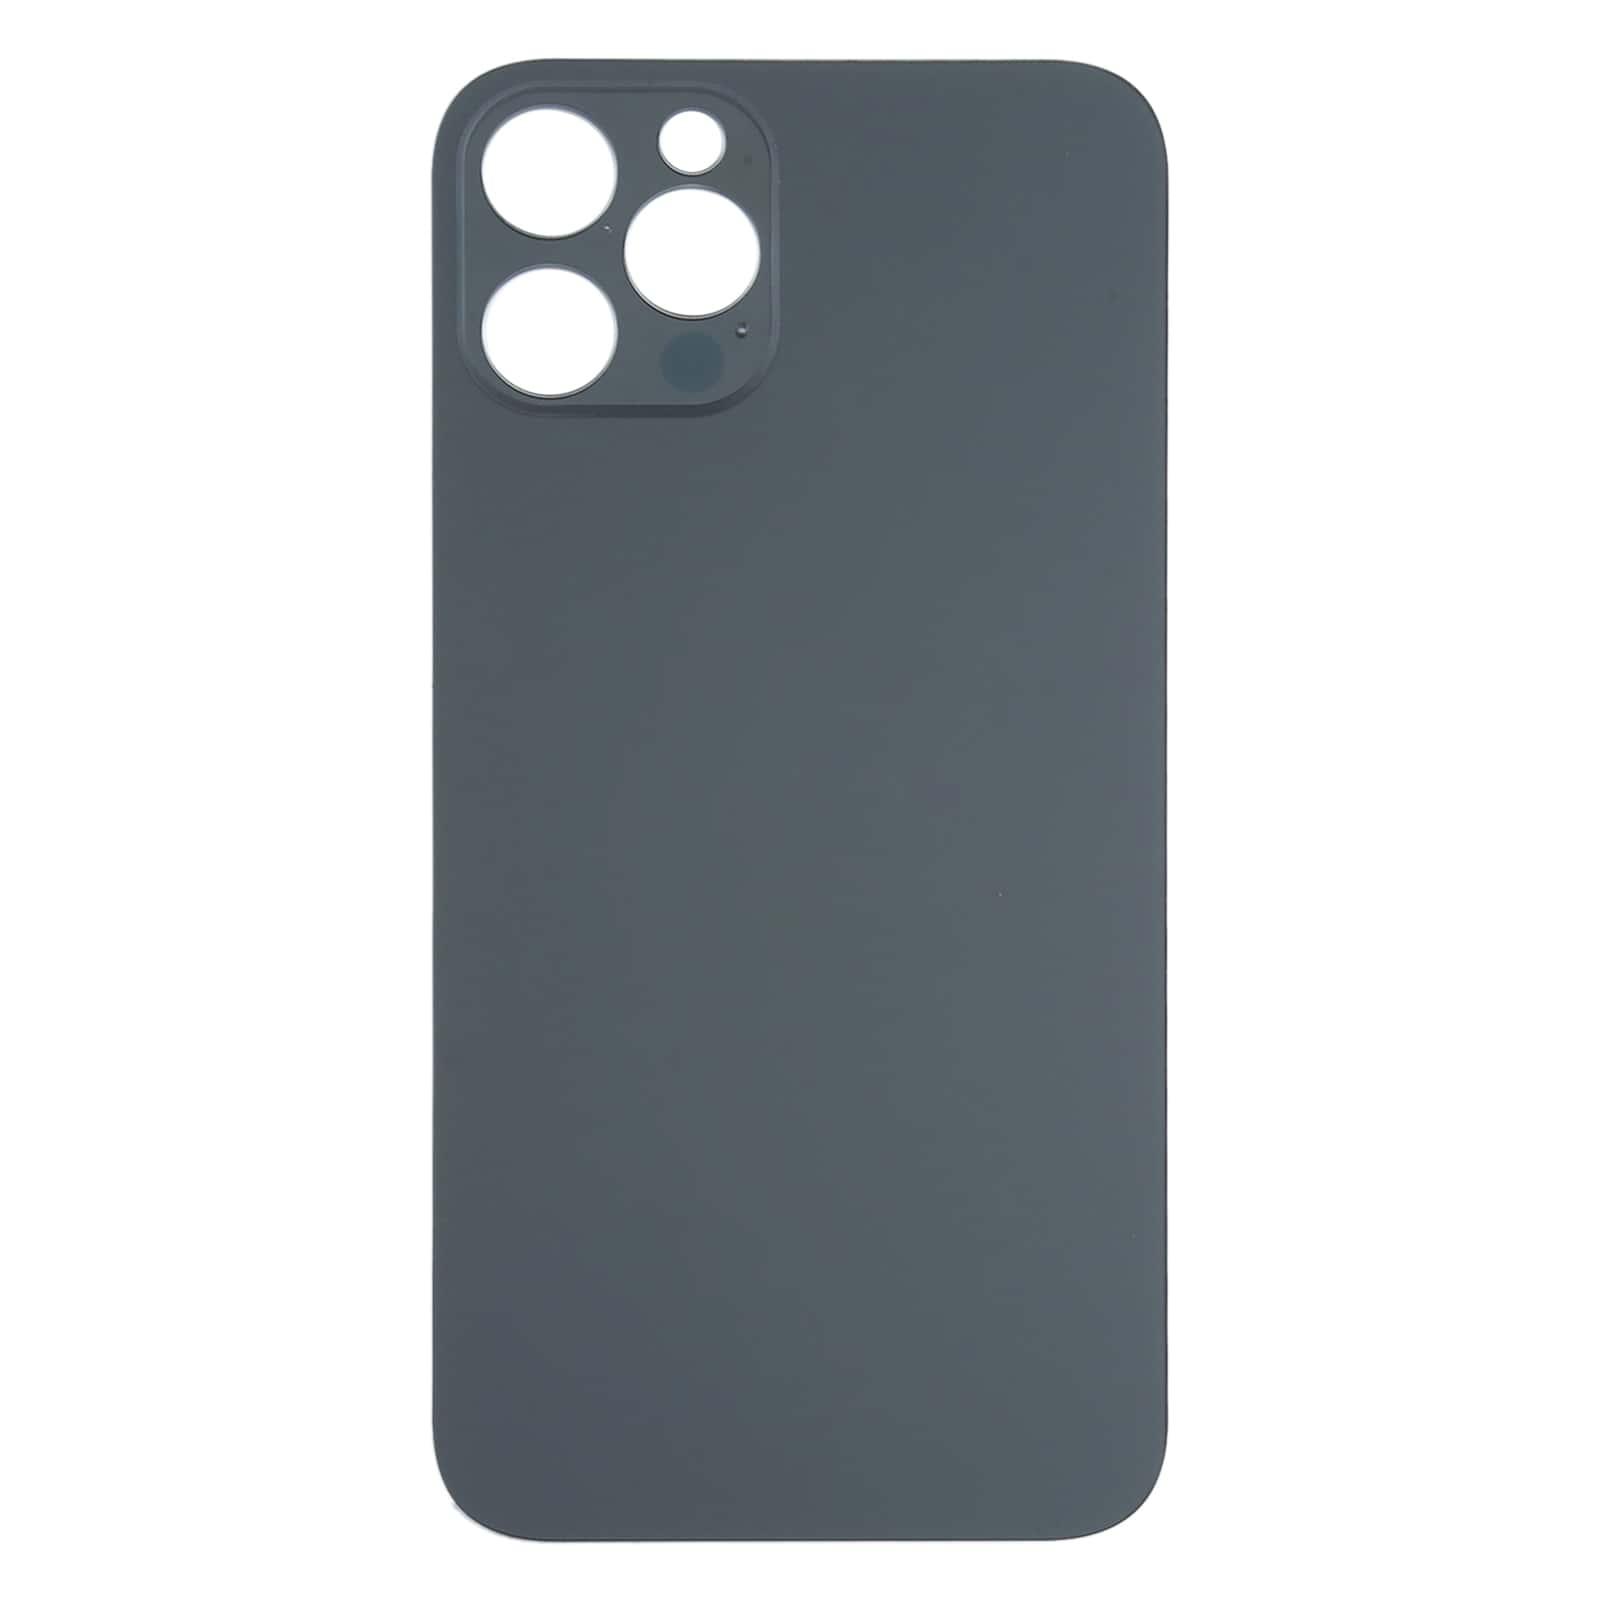 Back Glass Panel for  iPhone 12 Pro Black